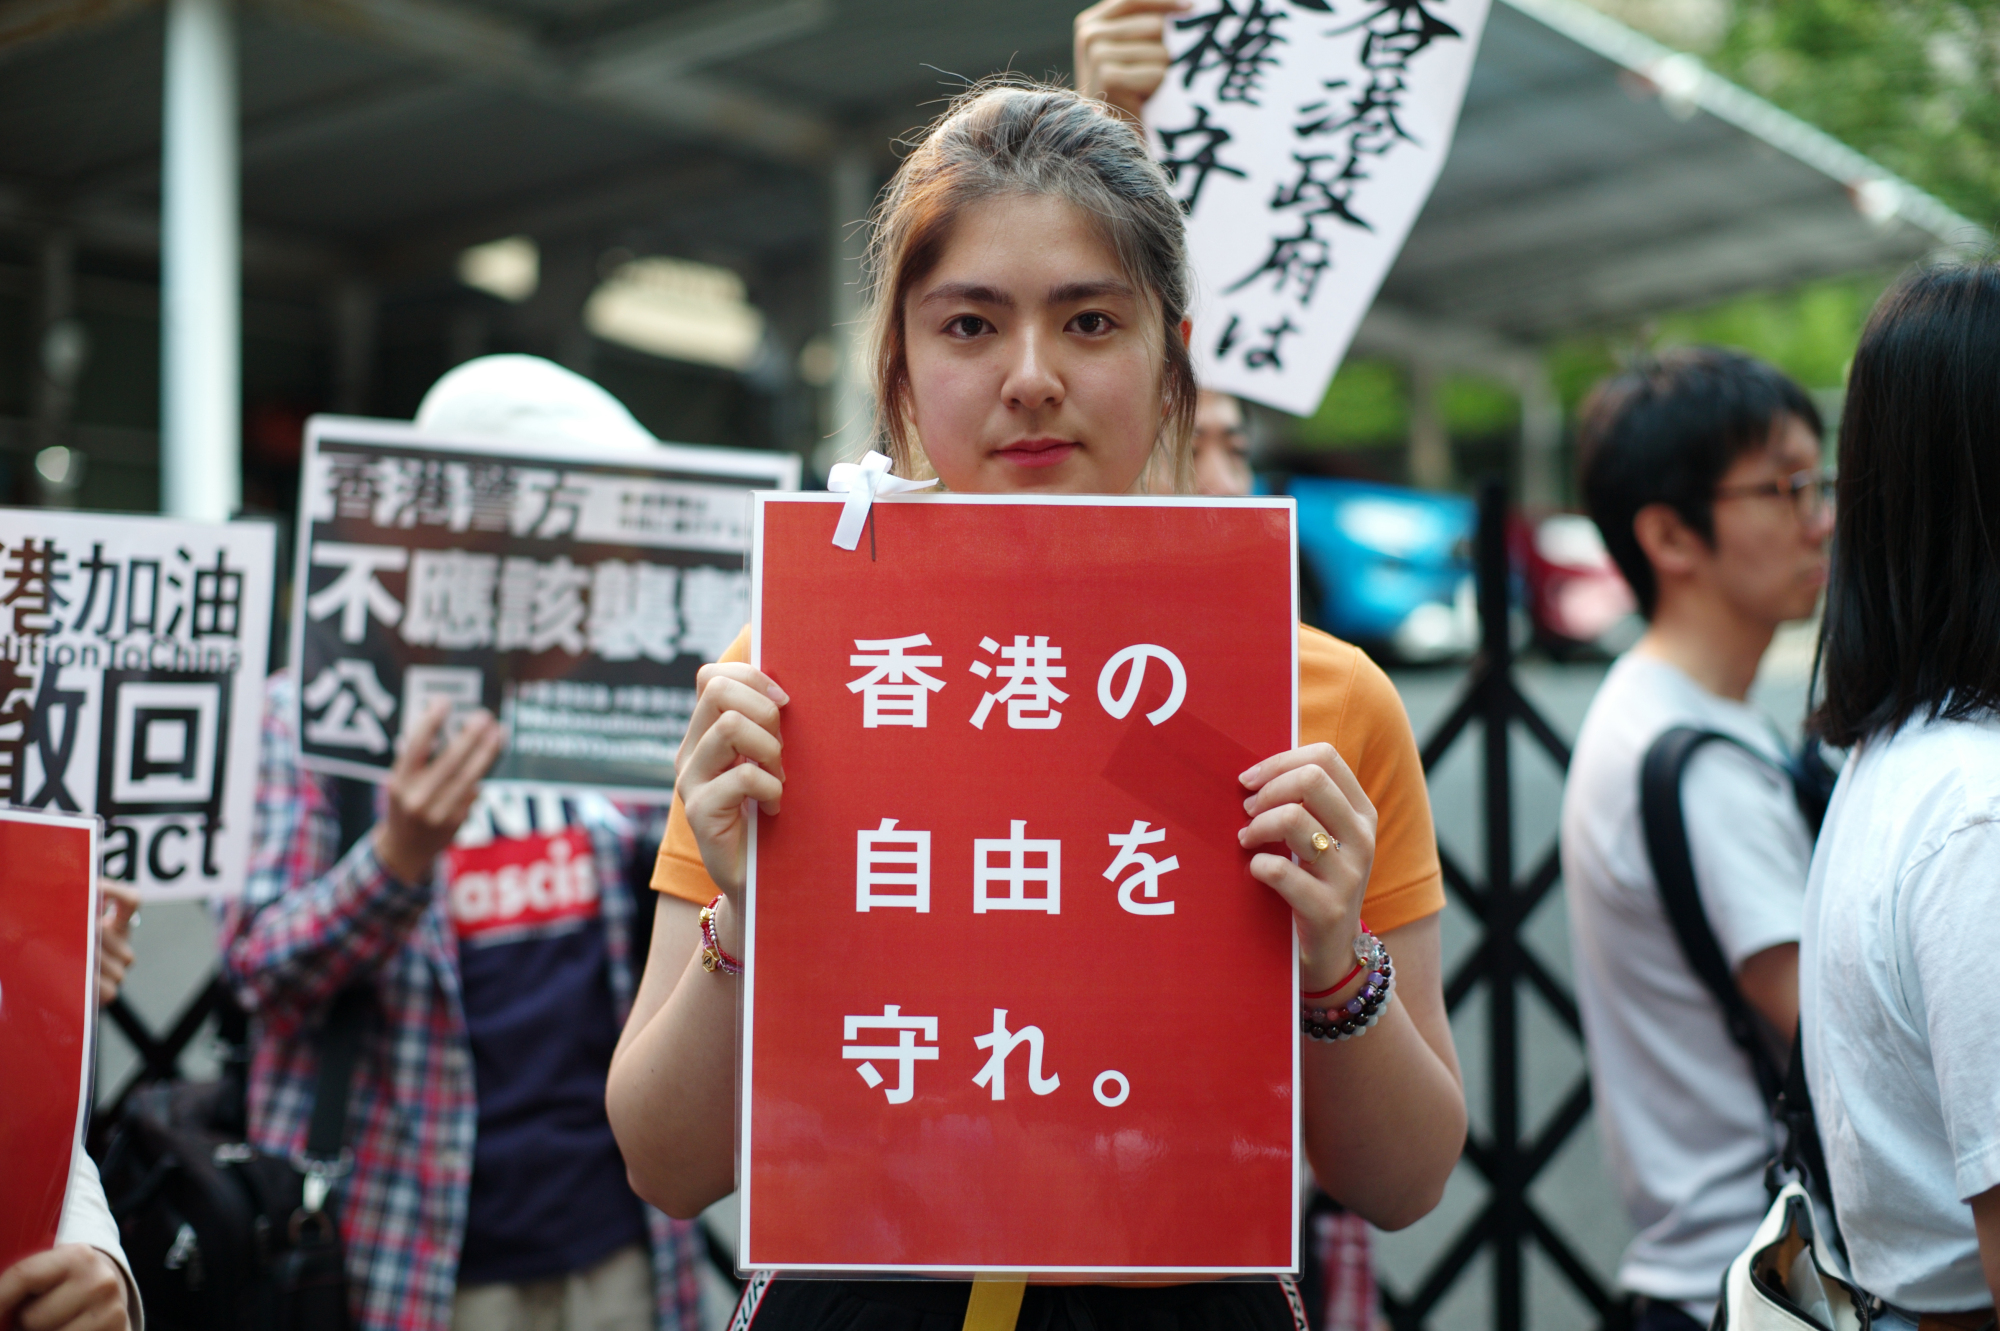 Mandy Tang, 19, an exchange student from Hong Kong, holds a poster reading 'Protect the Freedom of Hong Kong' on Thursday in Tokyo's Chiyoda Ward during a rally against the semiautonomous region's controversial extradition bill. | RYUSEI TAKAHASHI